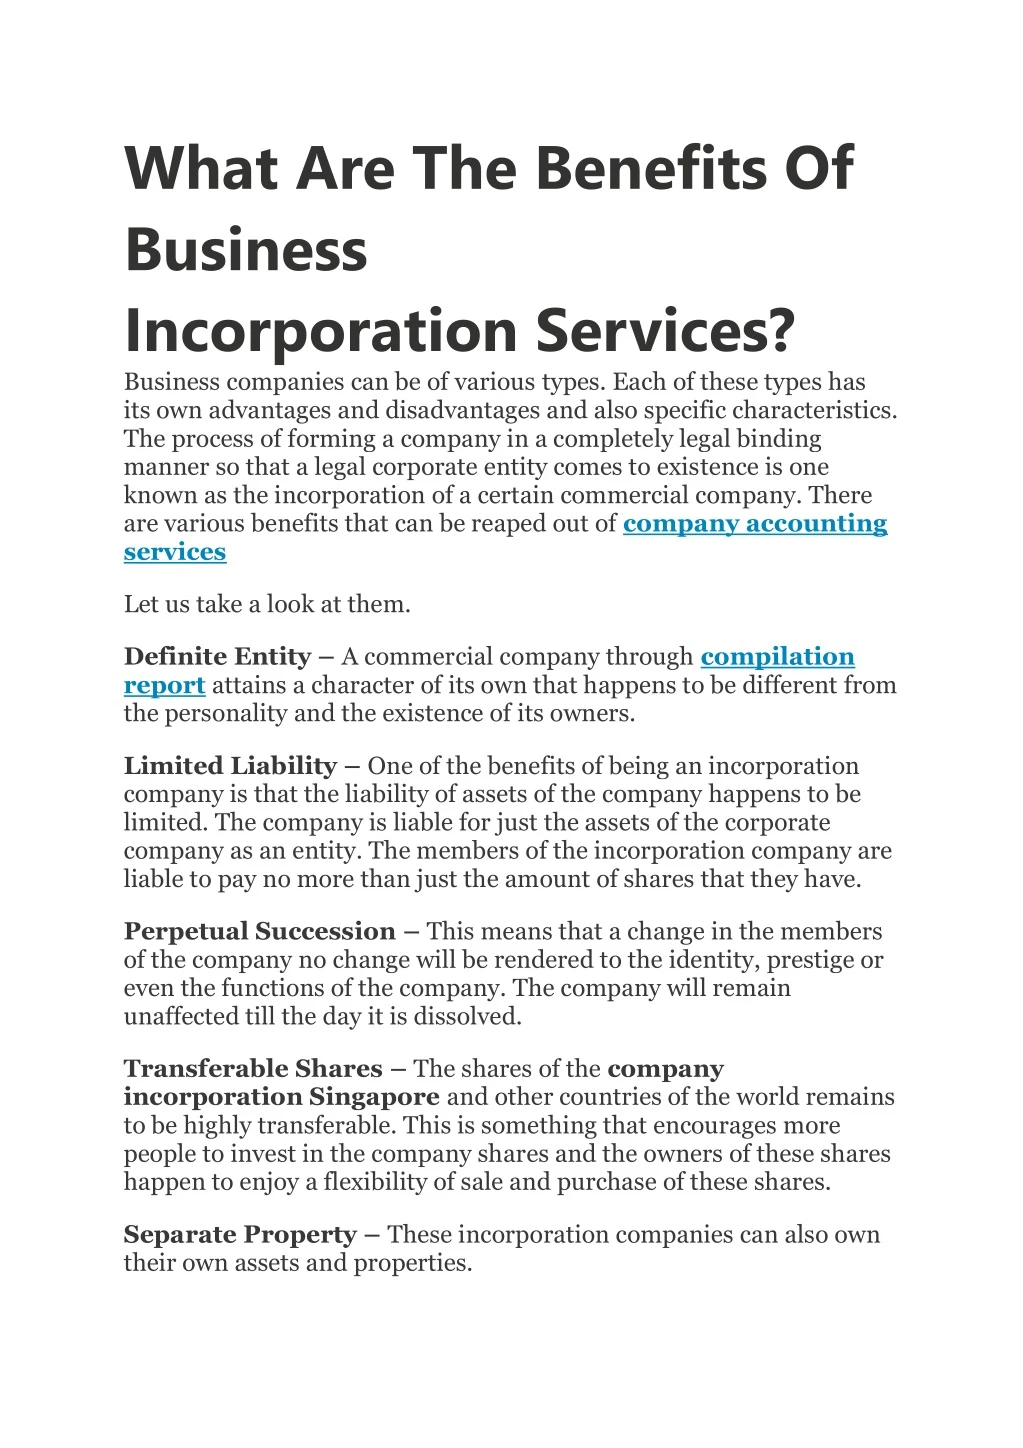 what are the benefits of business incorporation